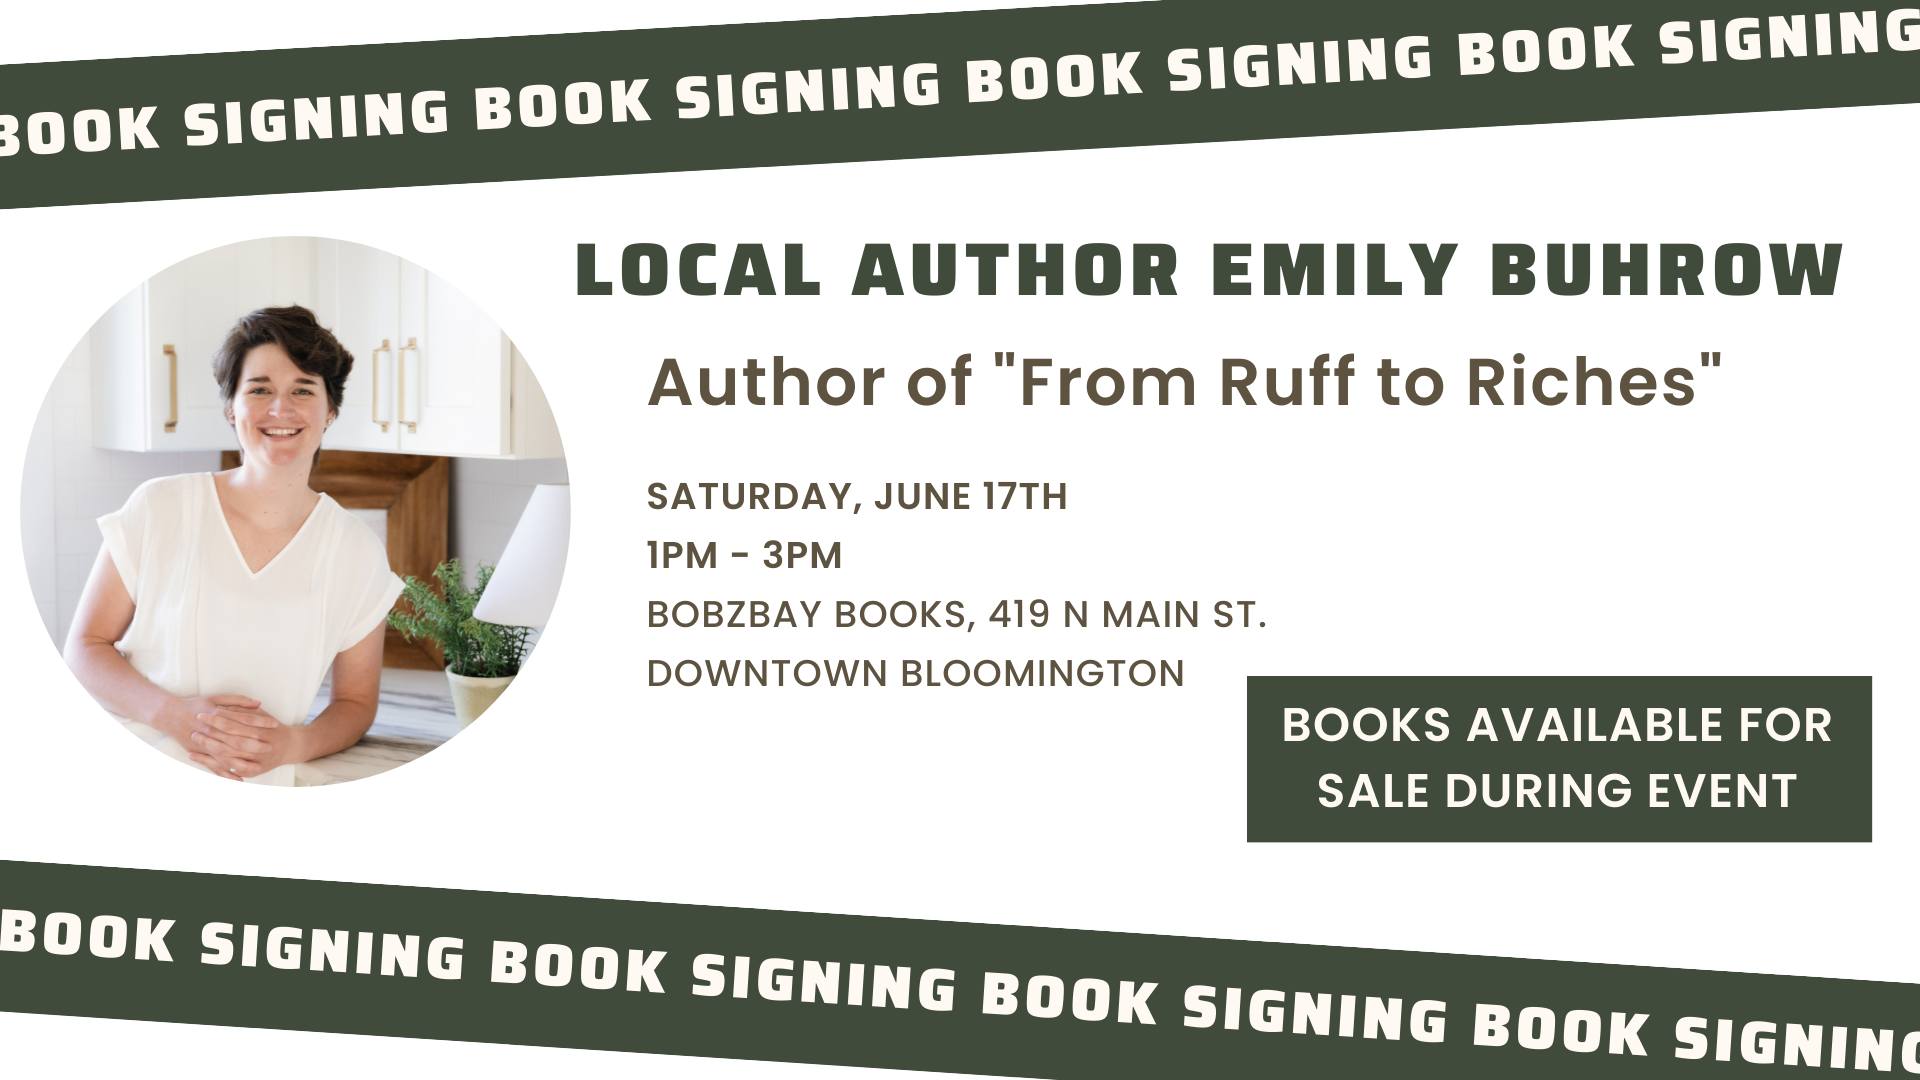 Local Author Emily Buhrow Book Signing (From Ruff to Riches) at Bobzbay Books